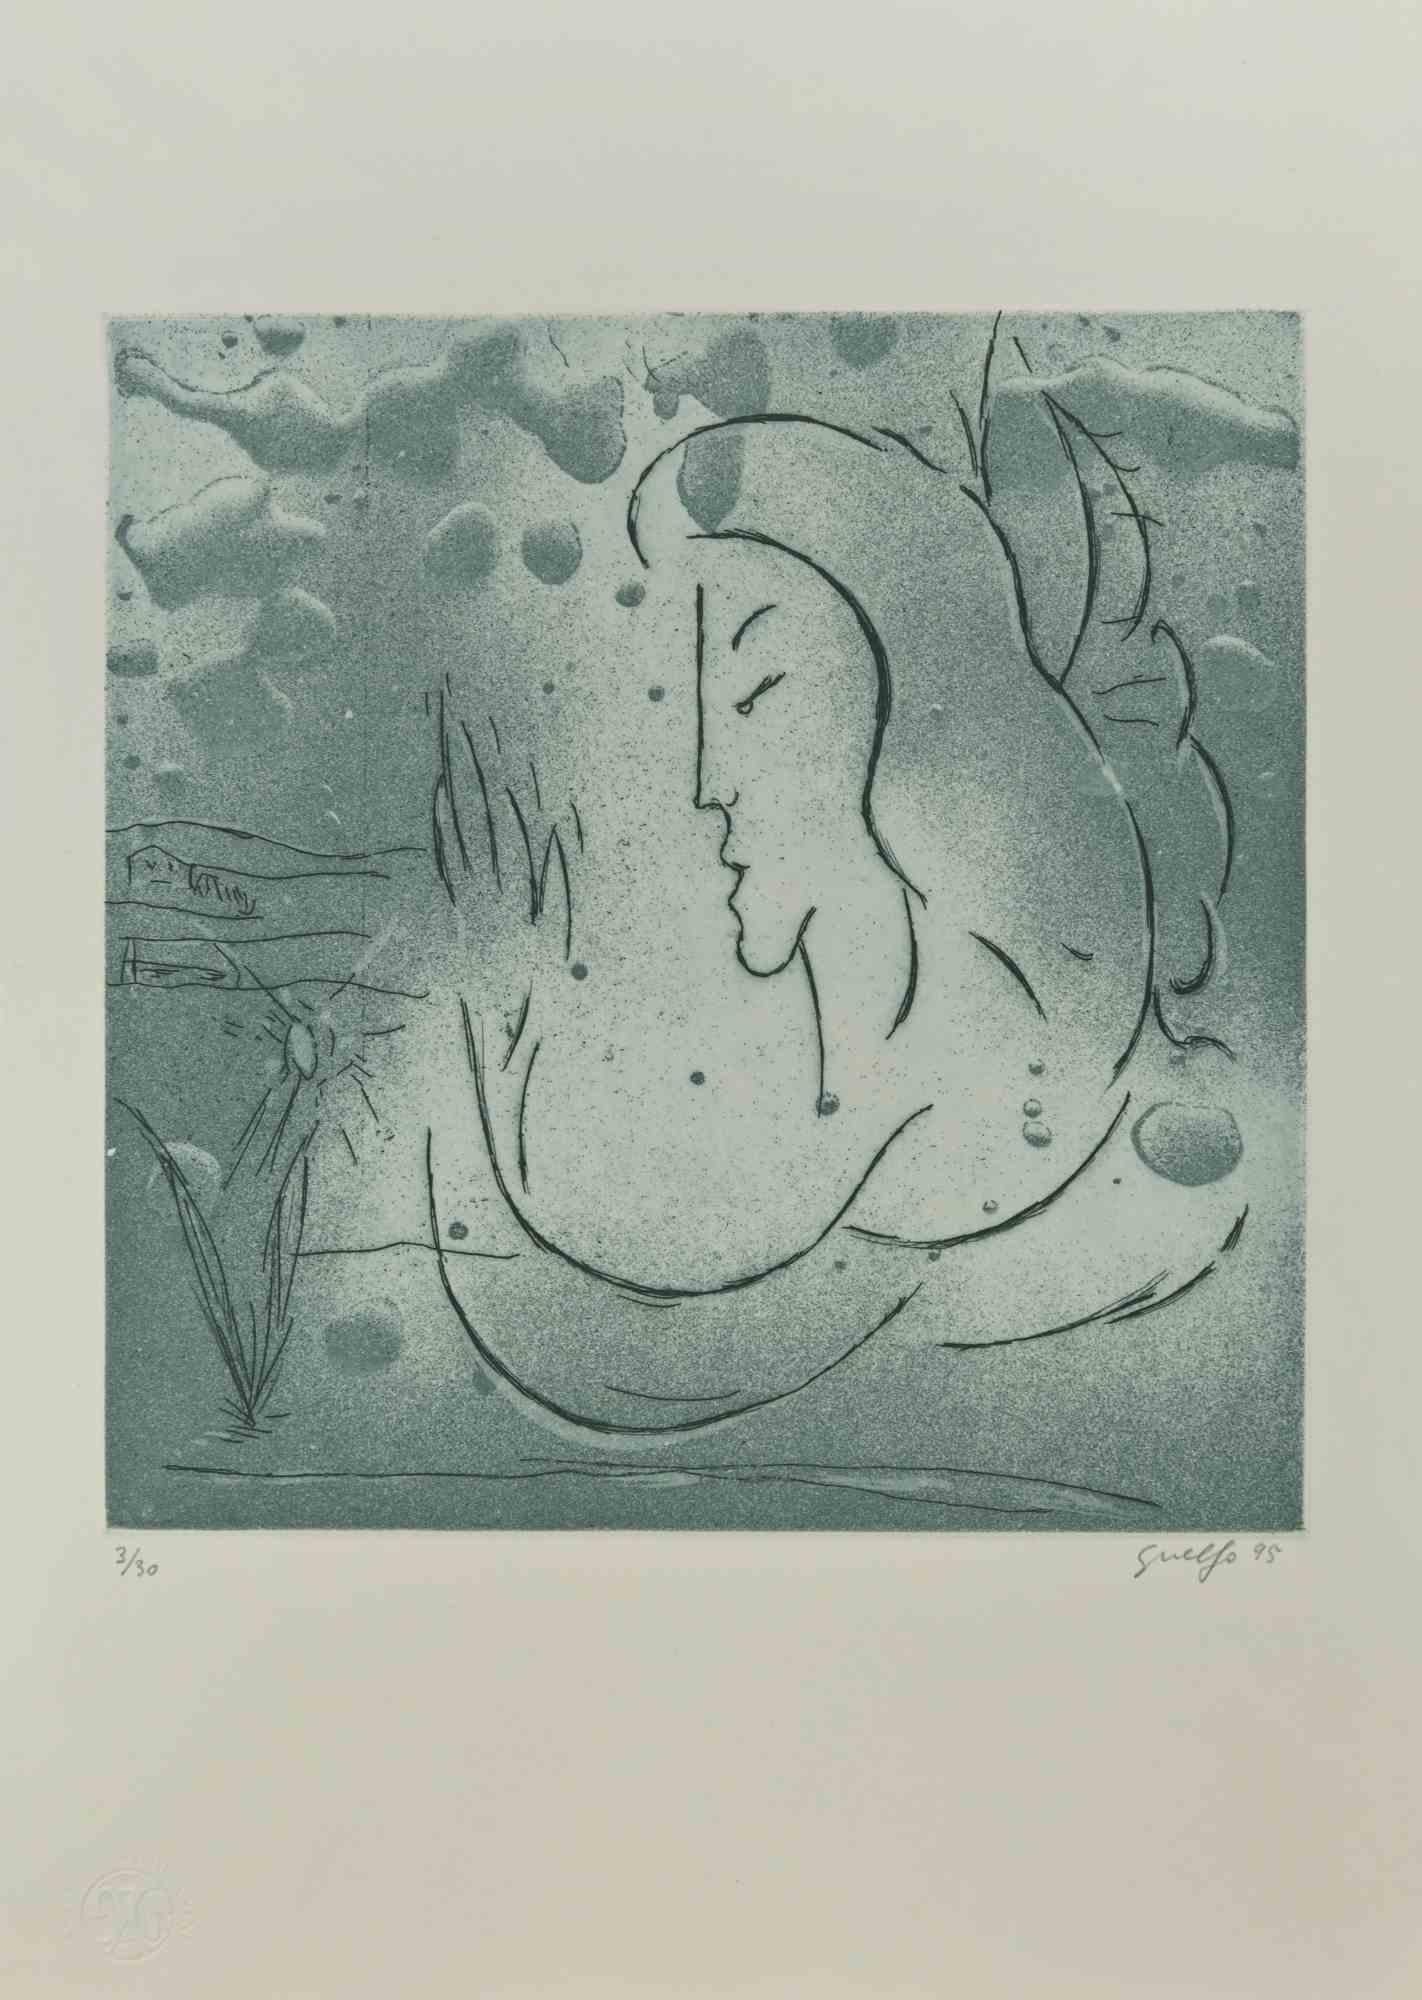 The Muse - Etching by Guelfo Bianchini - 1995